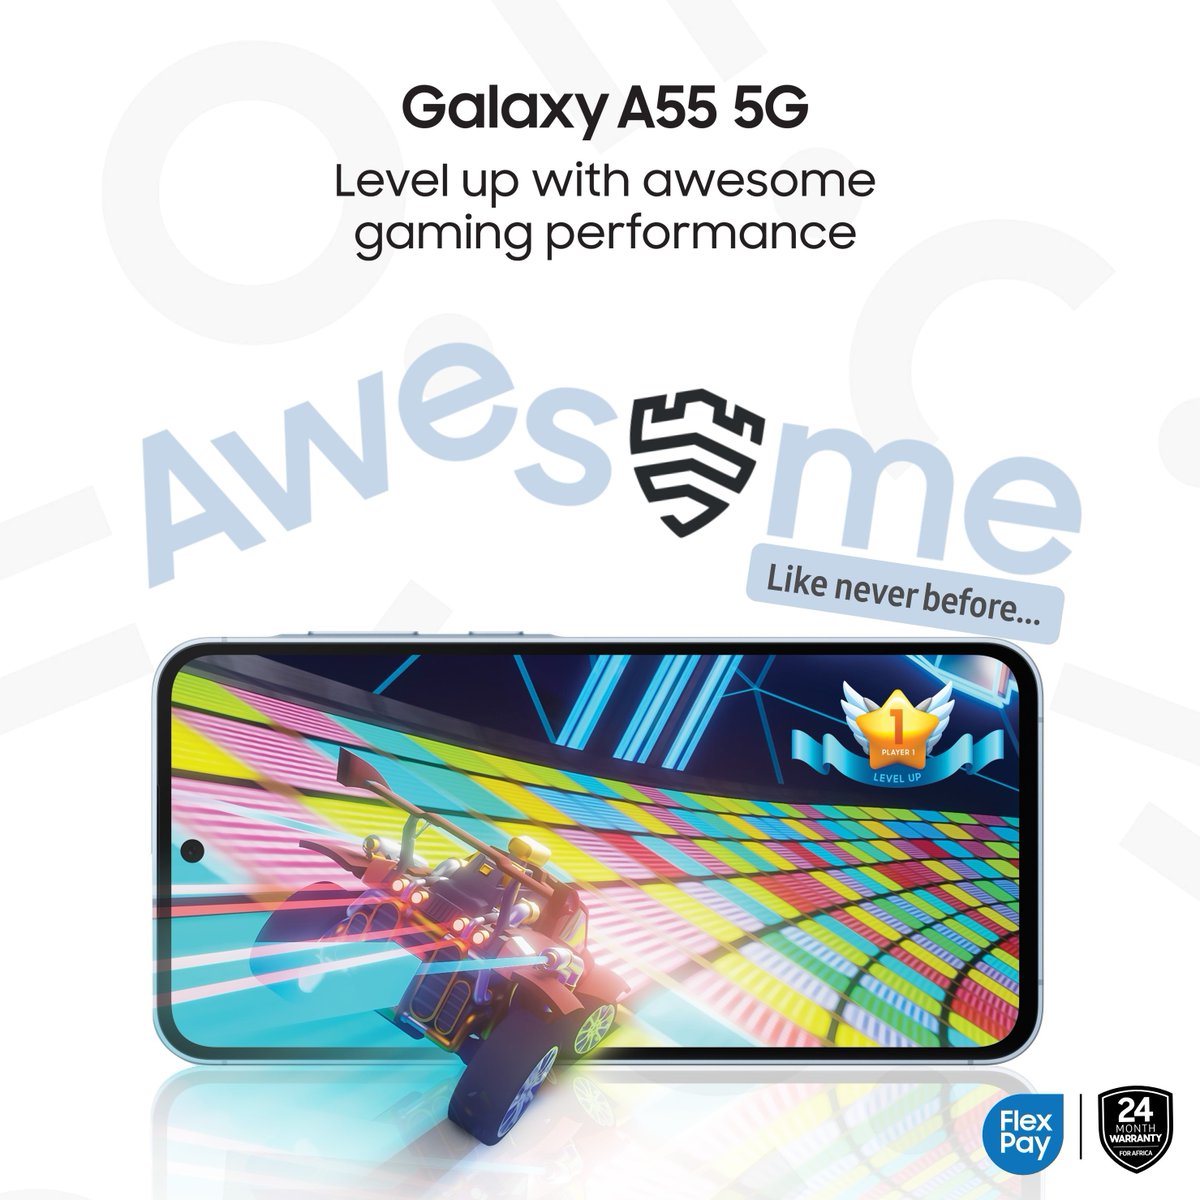 Get your game on with the new #GalaxyA55 5G.

Now’s the time to get your hands on a large, vivid display with Octa-core power.

#AwesomeLikeNeverBefore
#SamsungNigeria